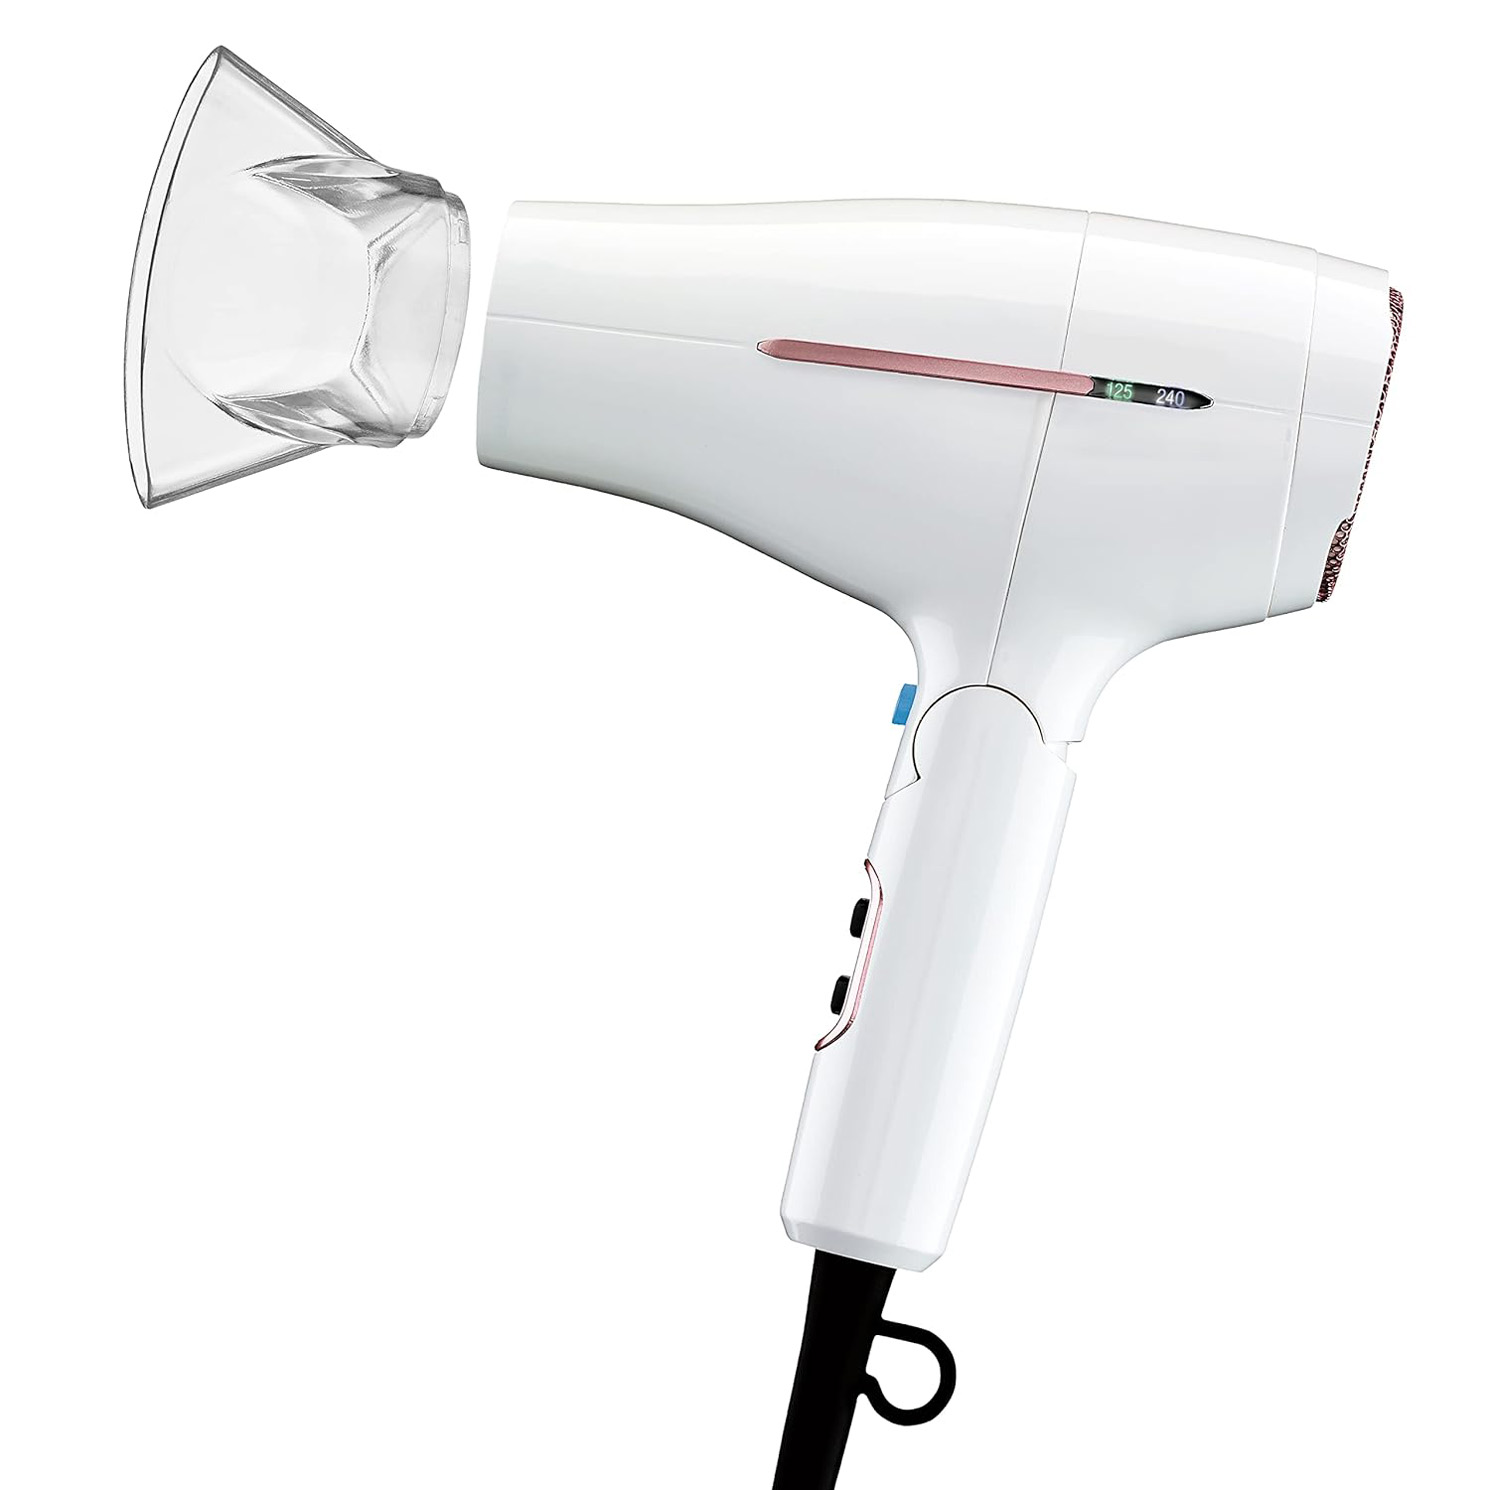 Conair 1875 Watt Worldwide Travel Hair Dryer with Smart Voltage Technology and Folding Handle, White, Travel Size Introducing the Conair 1875 Watt Worldwide Travel Hair Dryer featuring powerful styling on the go with smart voltage technology and a folding handle. Smart voltage technology will detect foreign voltage and adjust automatically, while still maintaining all of your heat and speed settings. This travel hair dryer is specially designed for worldwide usage, and a converter is not needed when traveling abroad (an adapter is still necessary). The Conair 1875 Watt Worldwide Travel Hair Dryer has a compact folding handle for easy storage, and ionic technology for smooth, shiny hair. Offers 3 heats/2 speed settings for all hair types and hair styles, plus a cool shot button to lock styles in place and a concentrator for pinpoint styling. For powerful styling on the go, the Conair 1875 Watt Worldwide Travel Hair Dryer with Smart Voltage Technology is the perfect traveling portable hair dryer companion. Travel Hair Dryer: This compact travel dryer features smart voltage technology to detect foreign voltage and adjust automatically while maintaining all of your heat and speed settings, plus a folding handle for easy storage Superior Function: A Cool Shot button locks hair styles in place and rocker switches make for easy handling; Includes 3 heat/2 speed custom dryer settings for different hair types Ionic Conditioning: Natural ion output helps fight frizz and bring out your hair’s natural shine; A concentrator nozzle is included for focused airflow to make hair smooth and sleek Leader in Hair Dryers: From traditional bonnets to hi tech dryers equipped with cutting edge technology, Conair has a great selection of hair dryers for every hair type and every hair style Conair Hair Care: Since 1959, we have made innovative small appliances, hair styling tools, and more; Our hair care line includes high quality hair dryers, brushes, styling tools, and hair accessories travel hair dryer travel hair dryer folding travel size hair dryer HAIR DRYER TRAVEL small hair dryer for travel dual voltage hair dryer travel hair dryer travel hair dryer travel blow dryer small travel size hair dryer Conair 1875 Watt Worldwide Travel Hair Dryer with Smart Voltage Technology and Folding Handle, White, Travel Size 719QFDEoseL Conair 1875 Watt Worldwide Travel Hair Dryer with Smart Voltage Technology and Folding Handle, White, Travel Size 91Ai27I07AL Conair 1875 Watt Worldwide Travel Hair Dryer with Smart Voltage Technology and Folding Handle, White, Travel Size